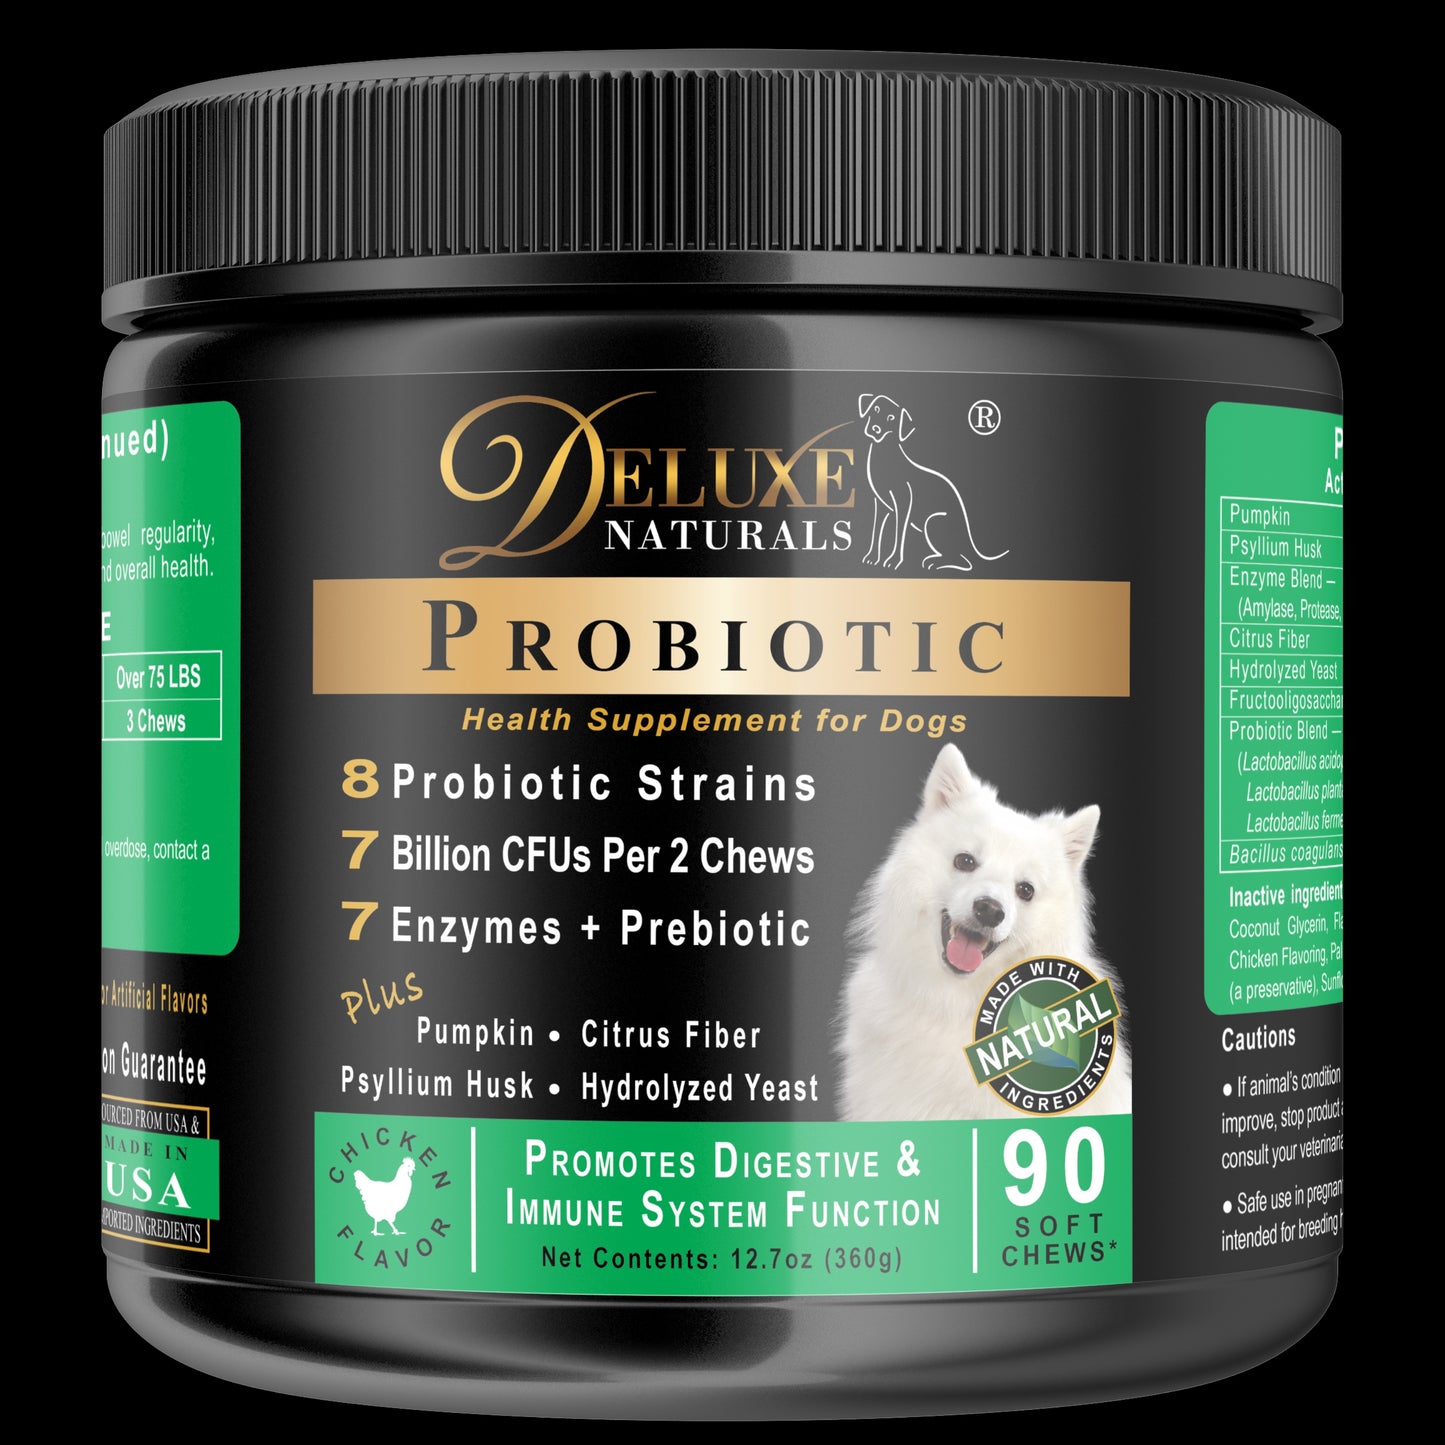 Deluxe Naturals Probiotic Soft Chews for Dogs - 360 Count (Pack of 4 x 90ct)